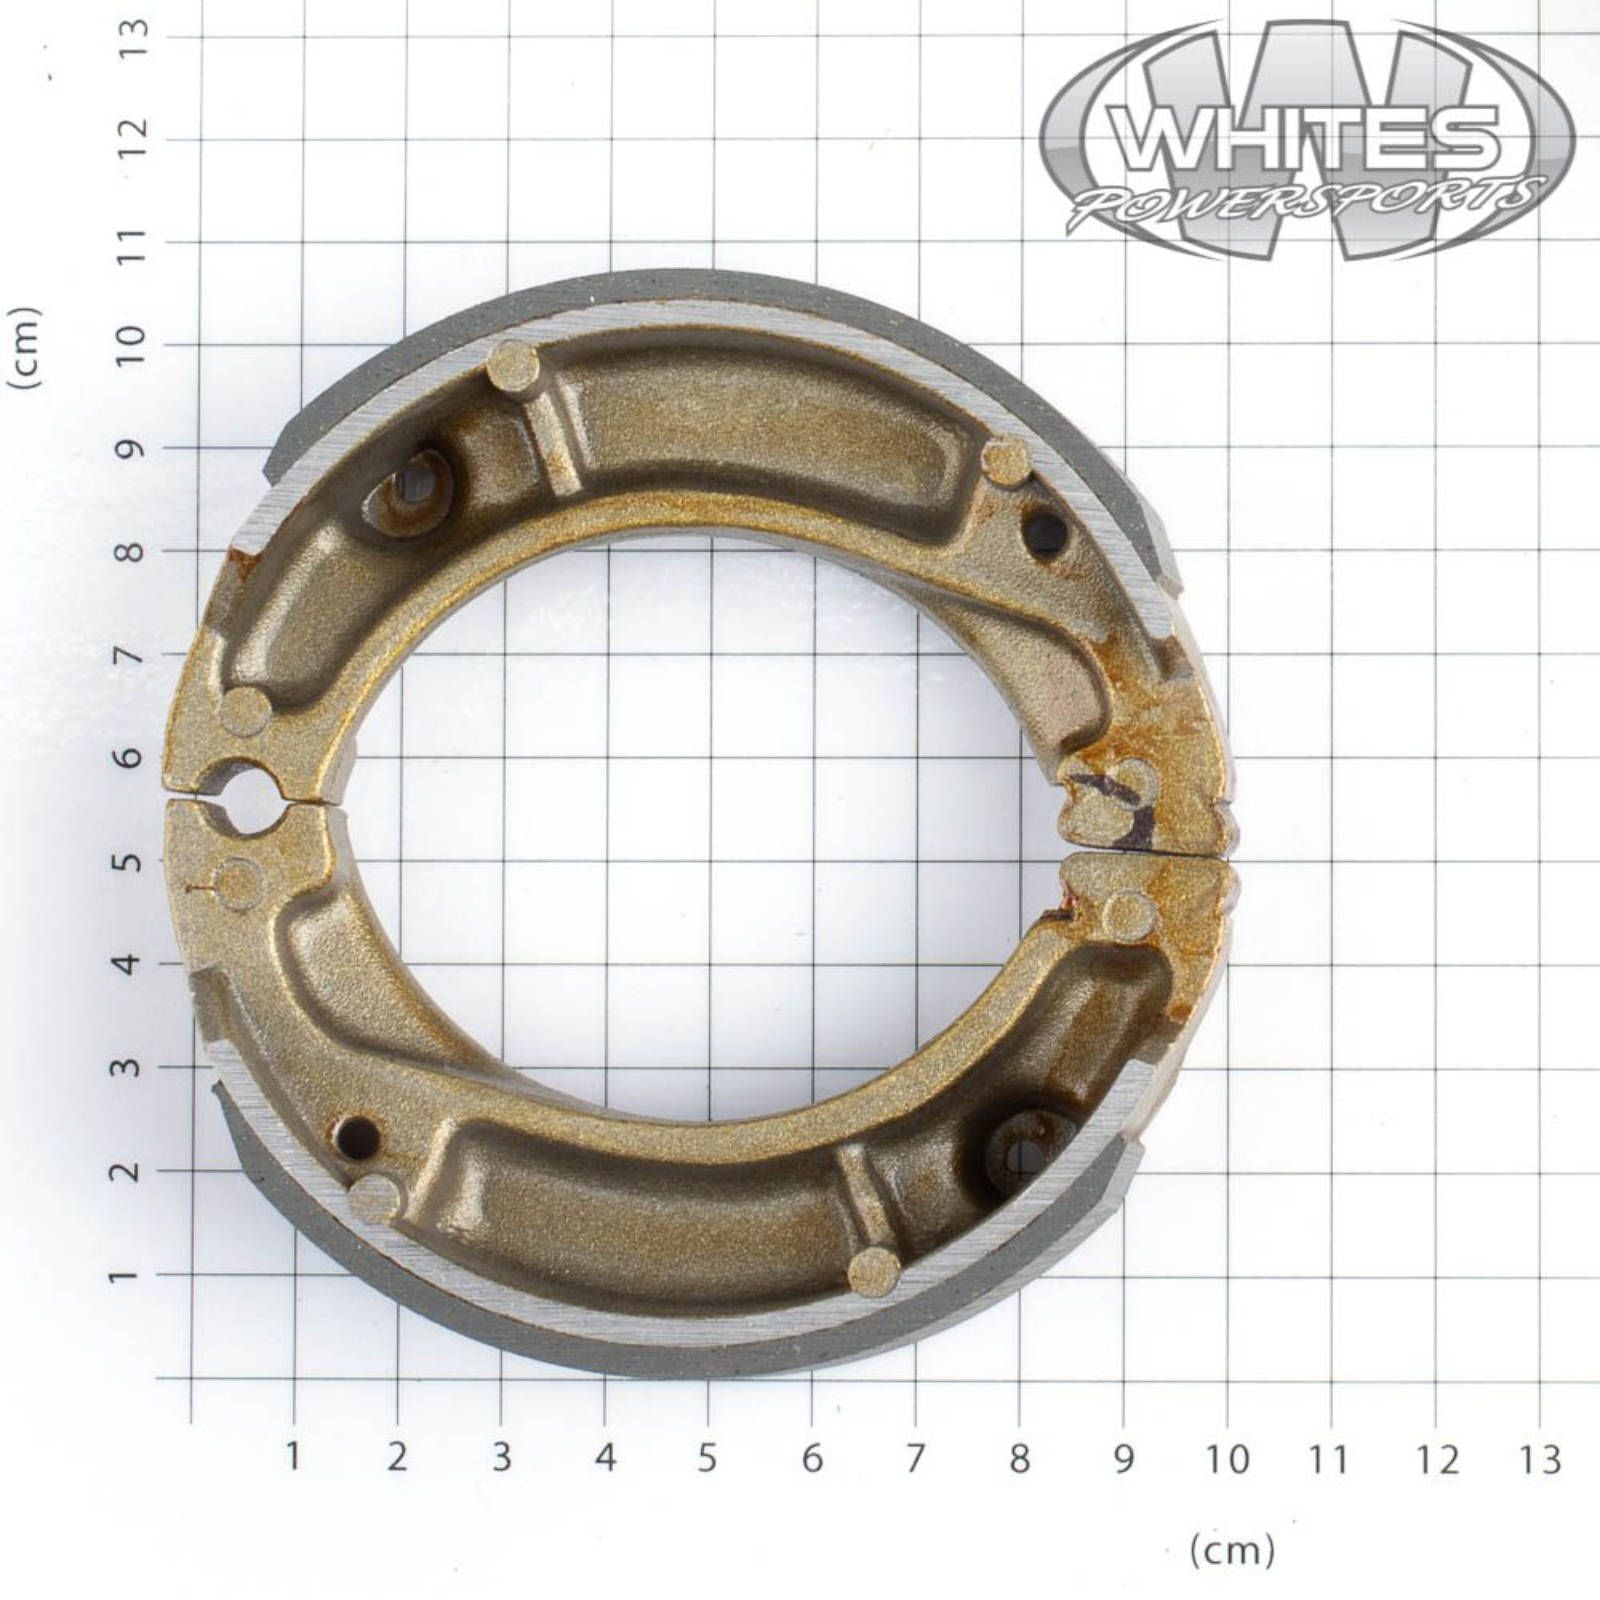 New WHITES Motorcycle Brake Shoes #WPBS39124